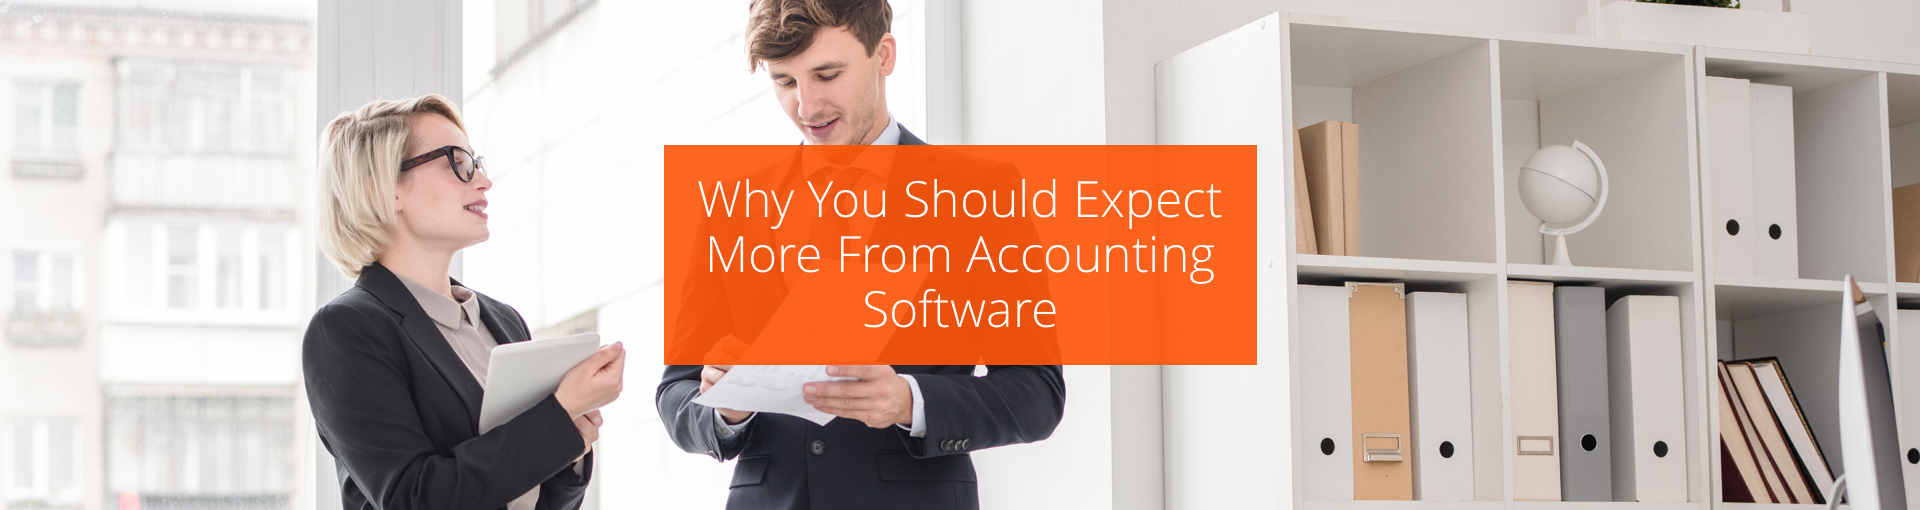 Why You Should Expect More From Accounting Software Featured Image